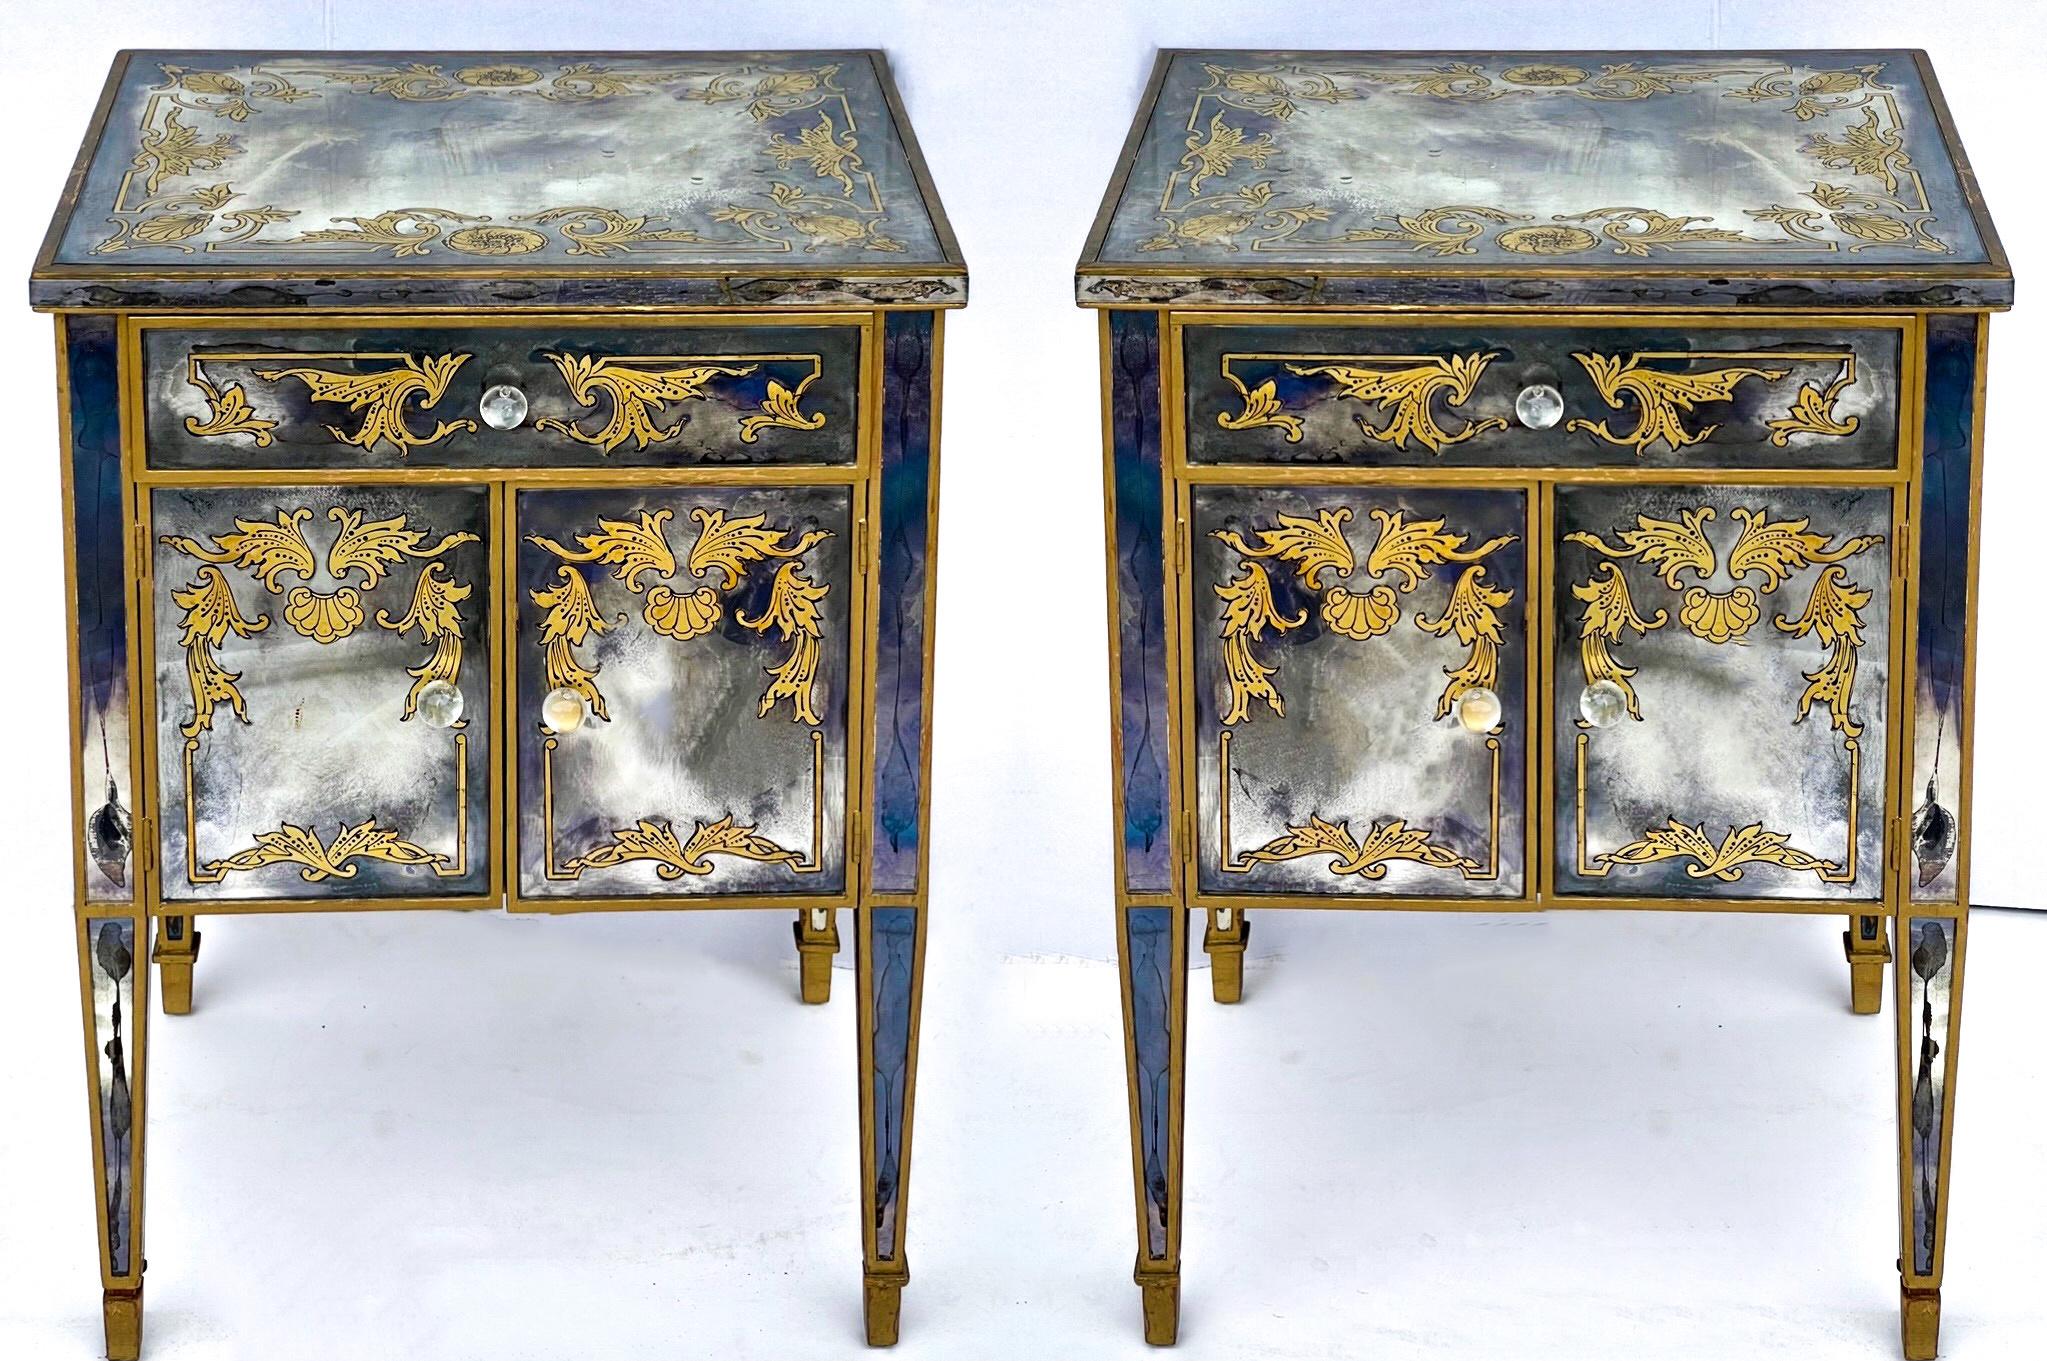 20th Century 1960s French Englomise Mirrored Chests / Side Tables Att. Maison Jansen, Pair